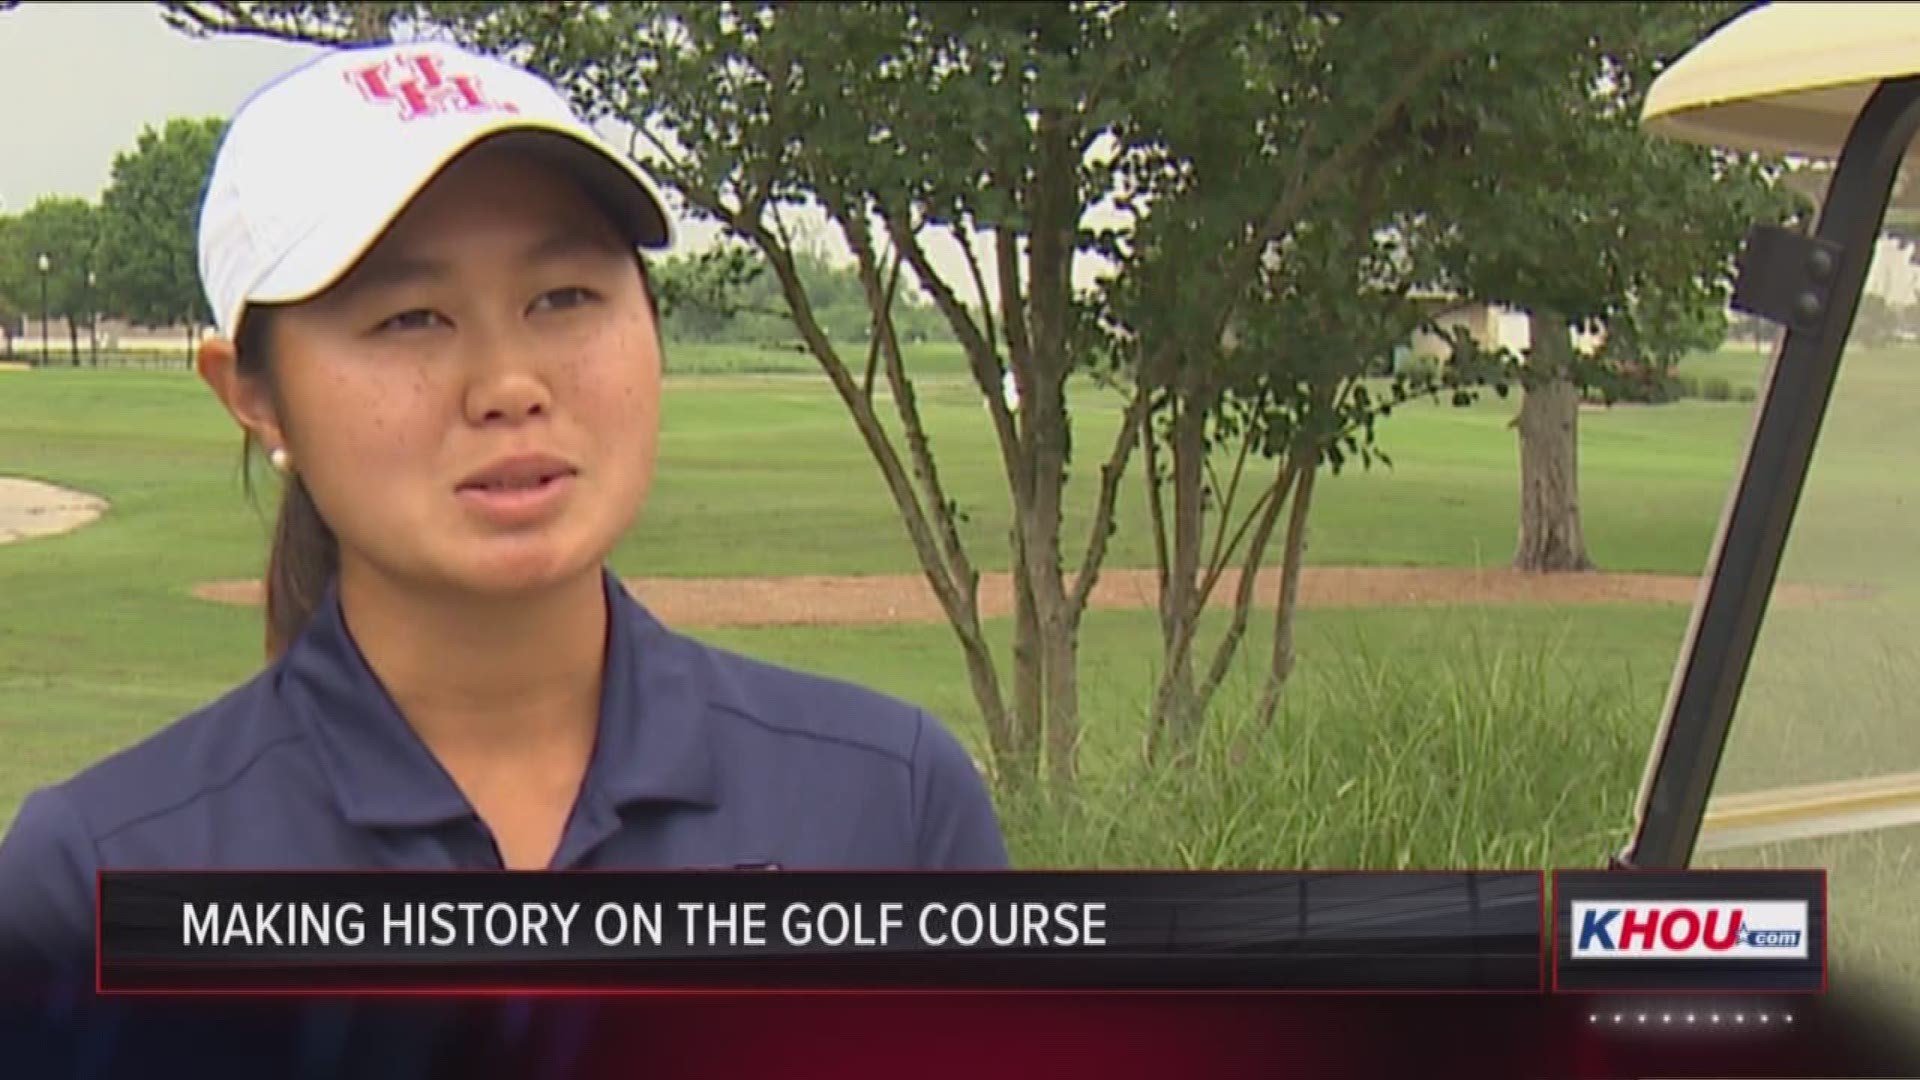 The UH women's golf team is headed to the NCAA regionals this week in Austin, and one of the big reasons they're in the postseason has been the inspired play of a young woman from Dallas.